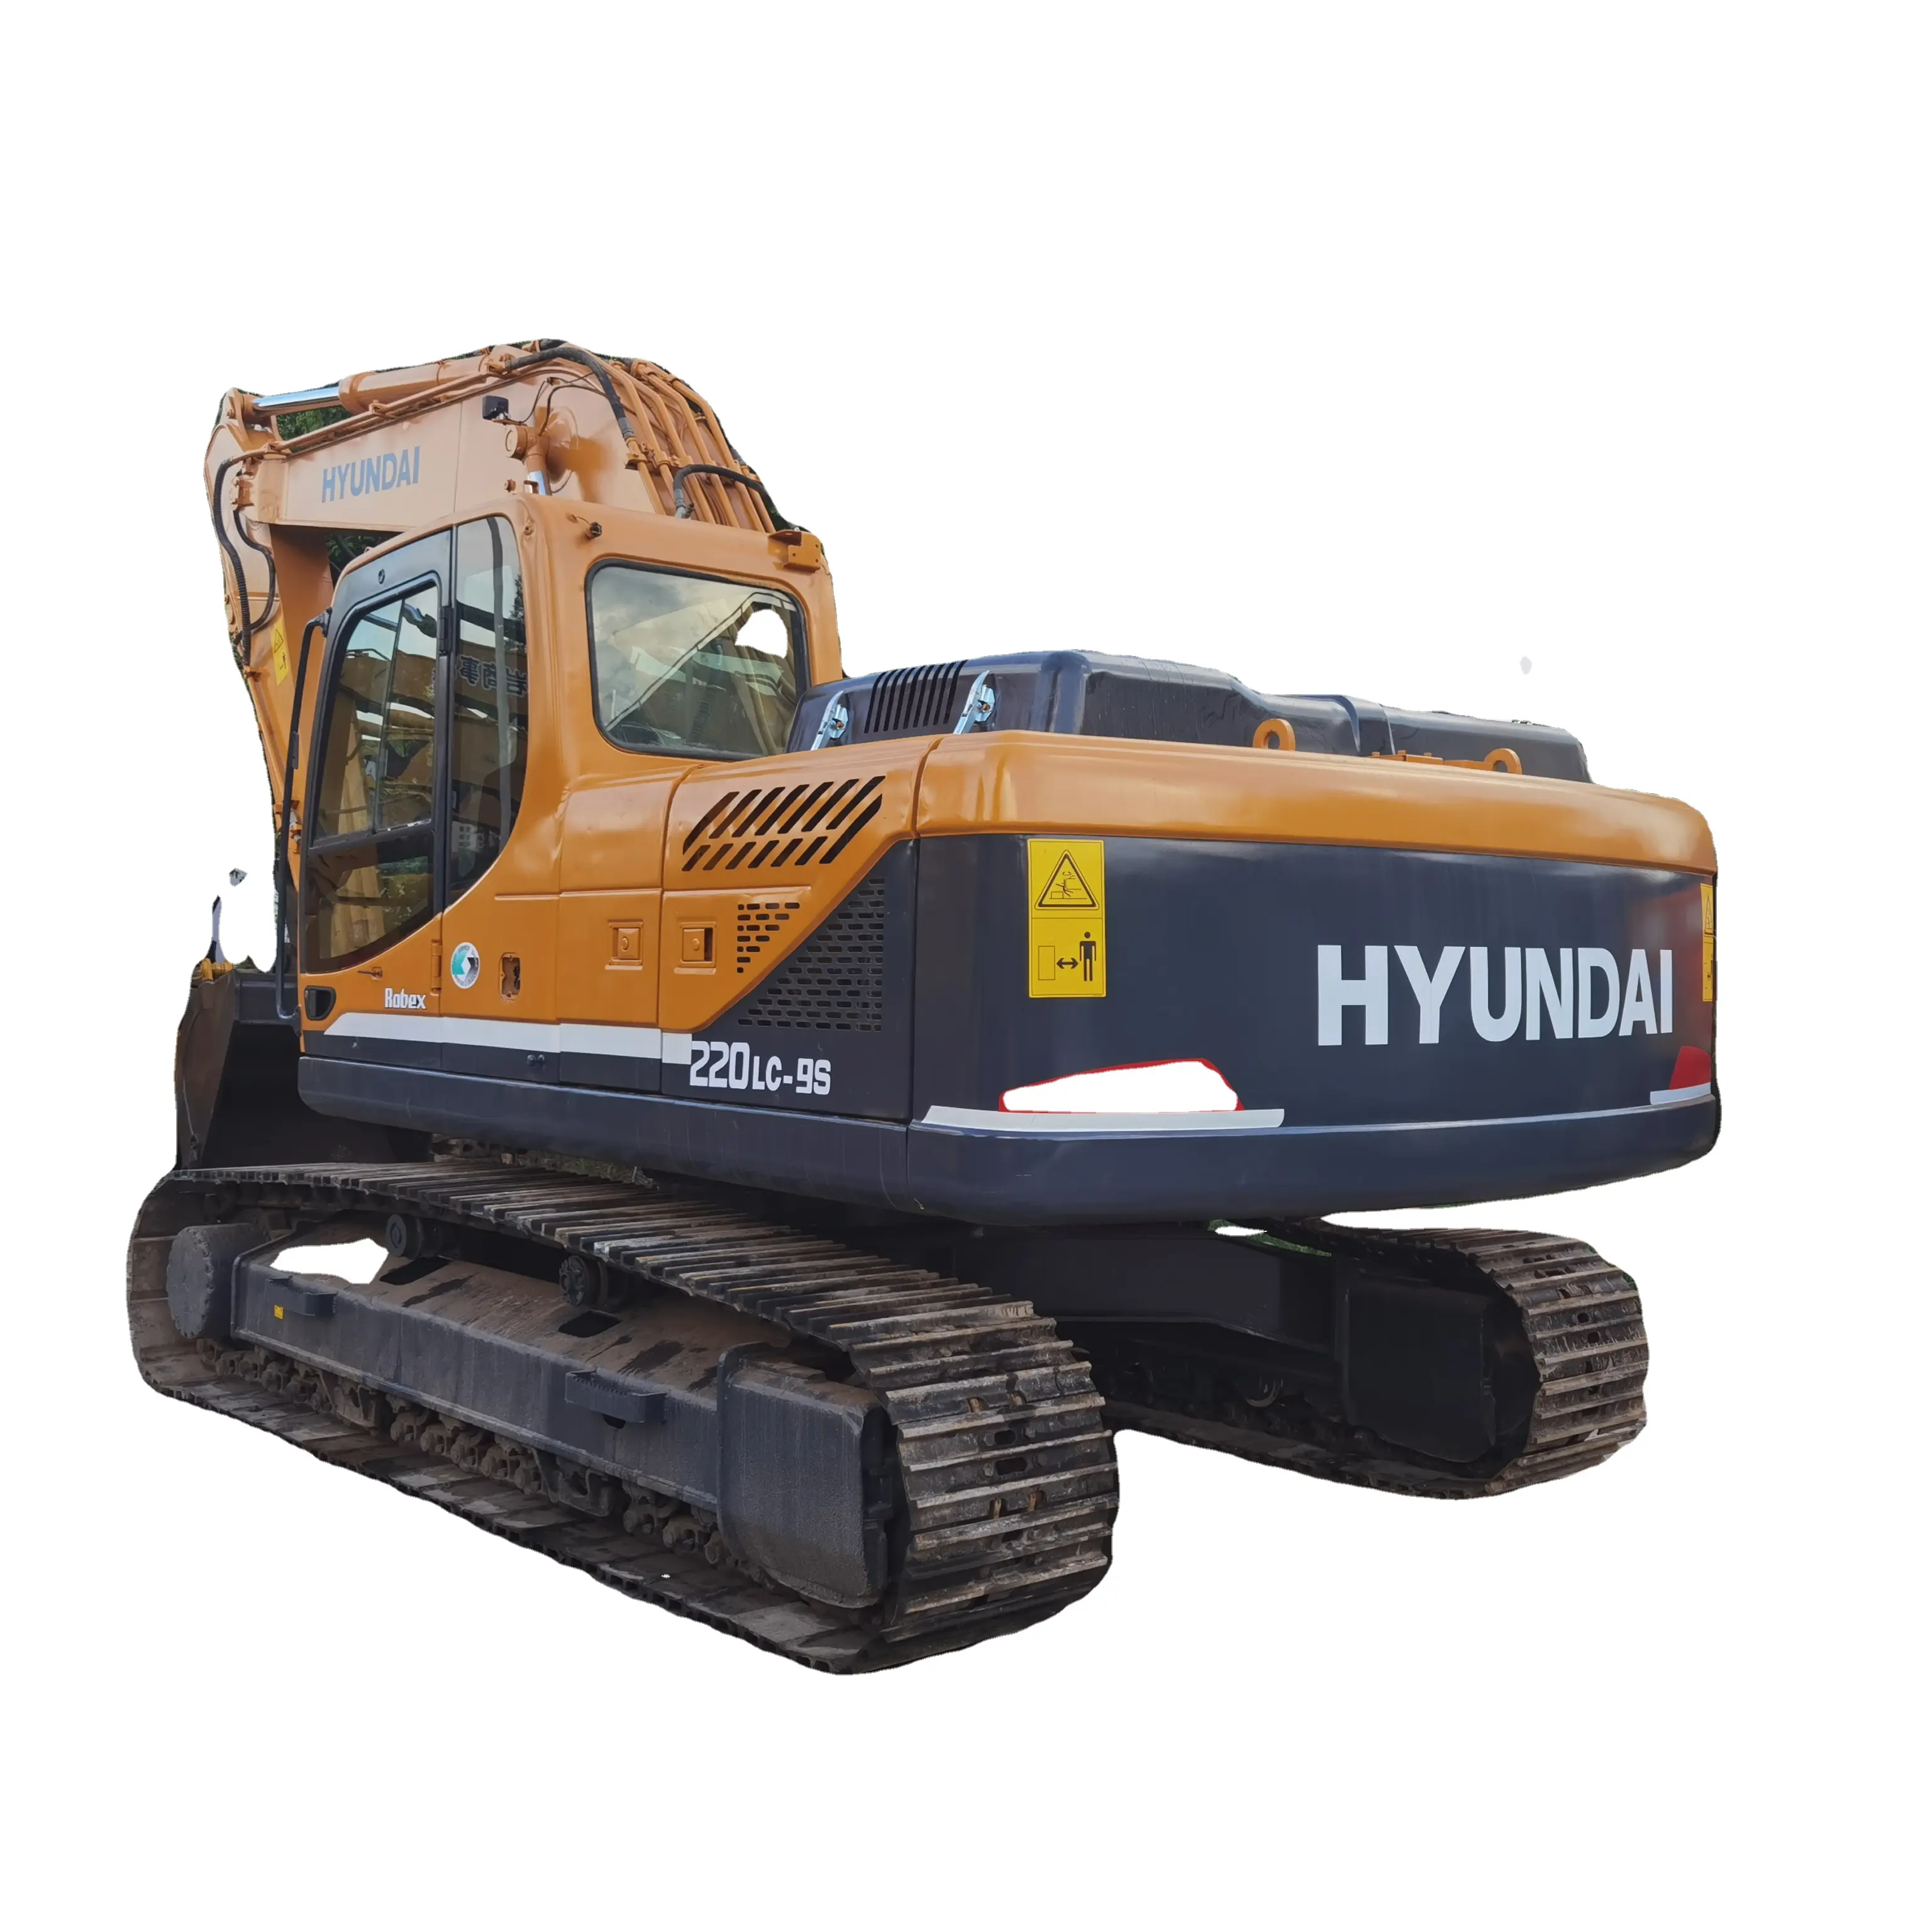 Good Quality Excavator Used Korea Hyundai 220LC-9S 150Lc-7 220LC-7 225LC-9T for sale at low price Good Quality